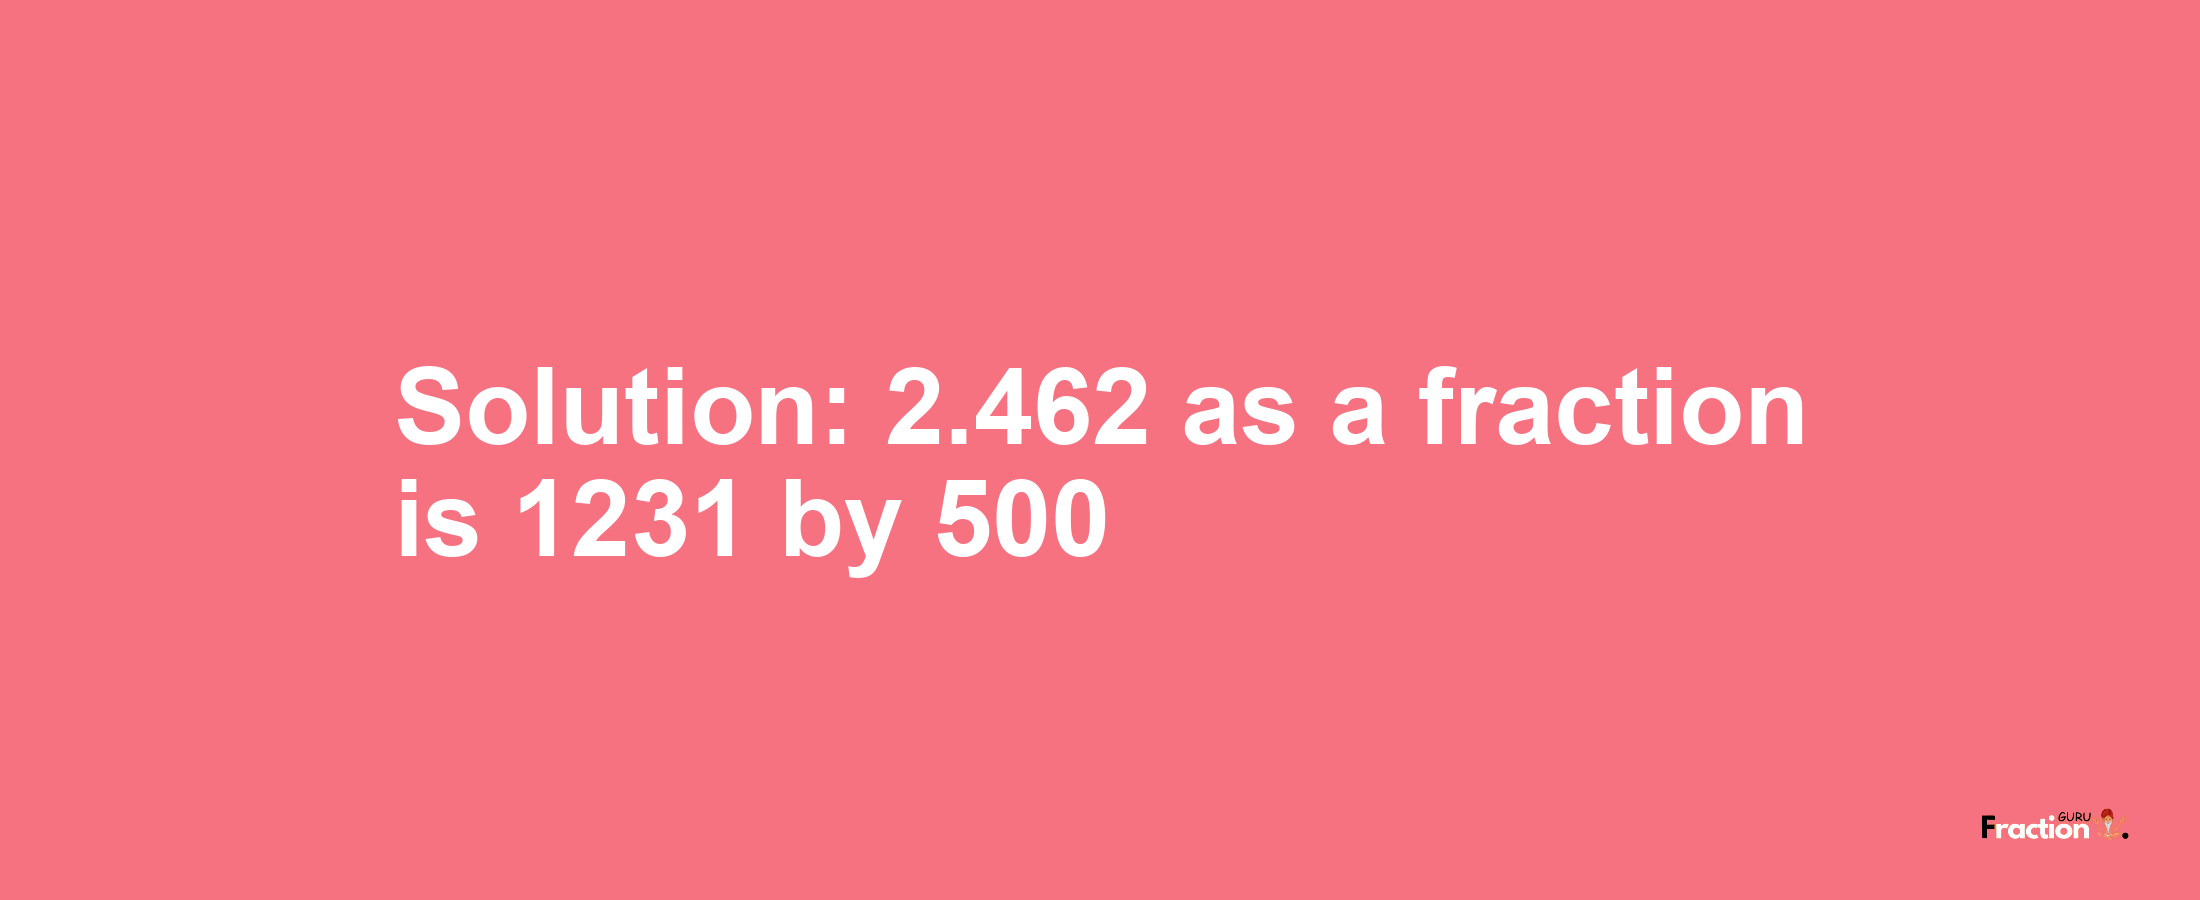 Solution:2.462 as a fraction is 1231/500